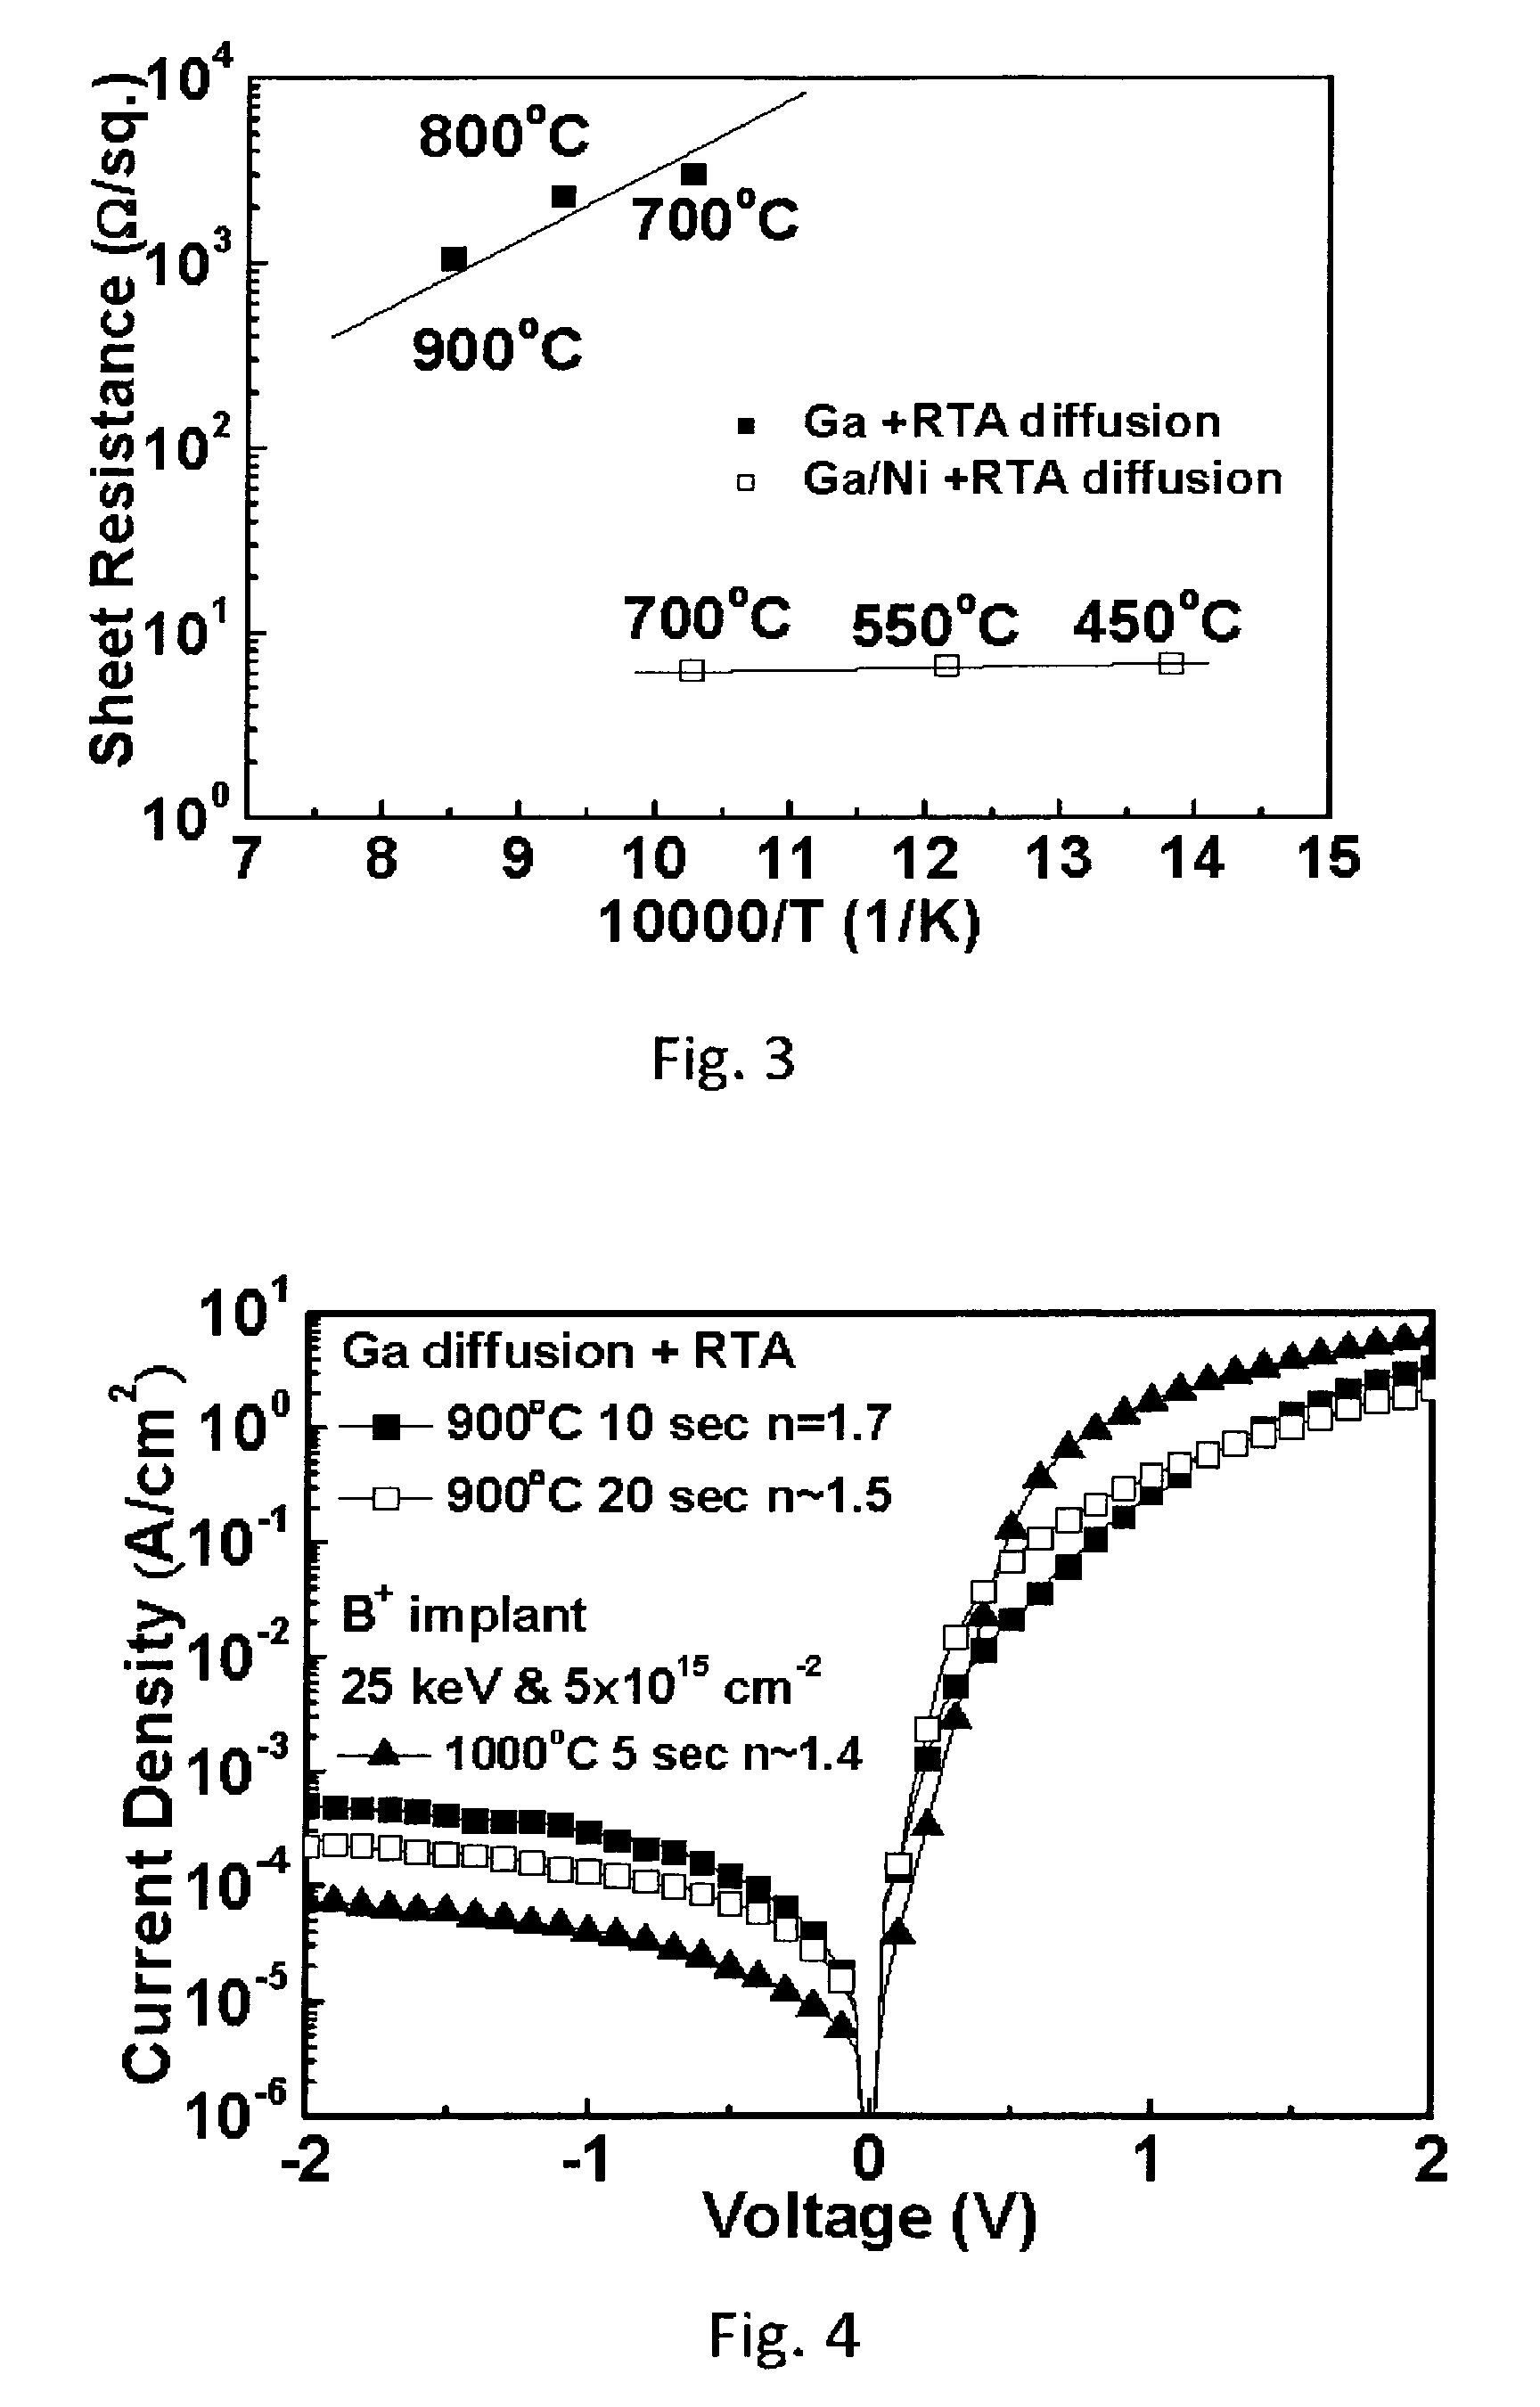 Method for making very low Vt metal-gate/high-k CMOSFETs using self-aligned low temperature shallow junctions